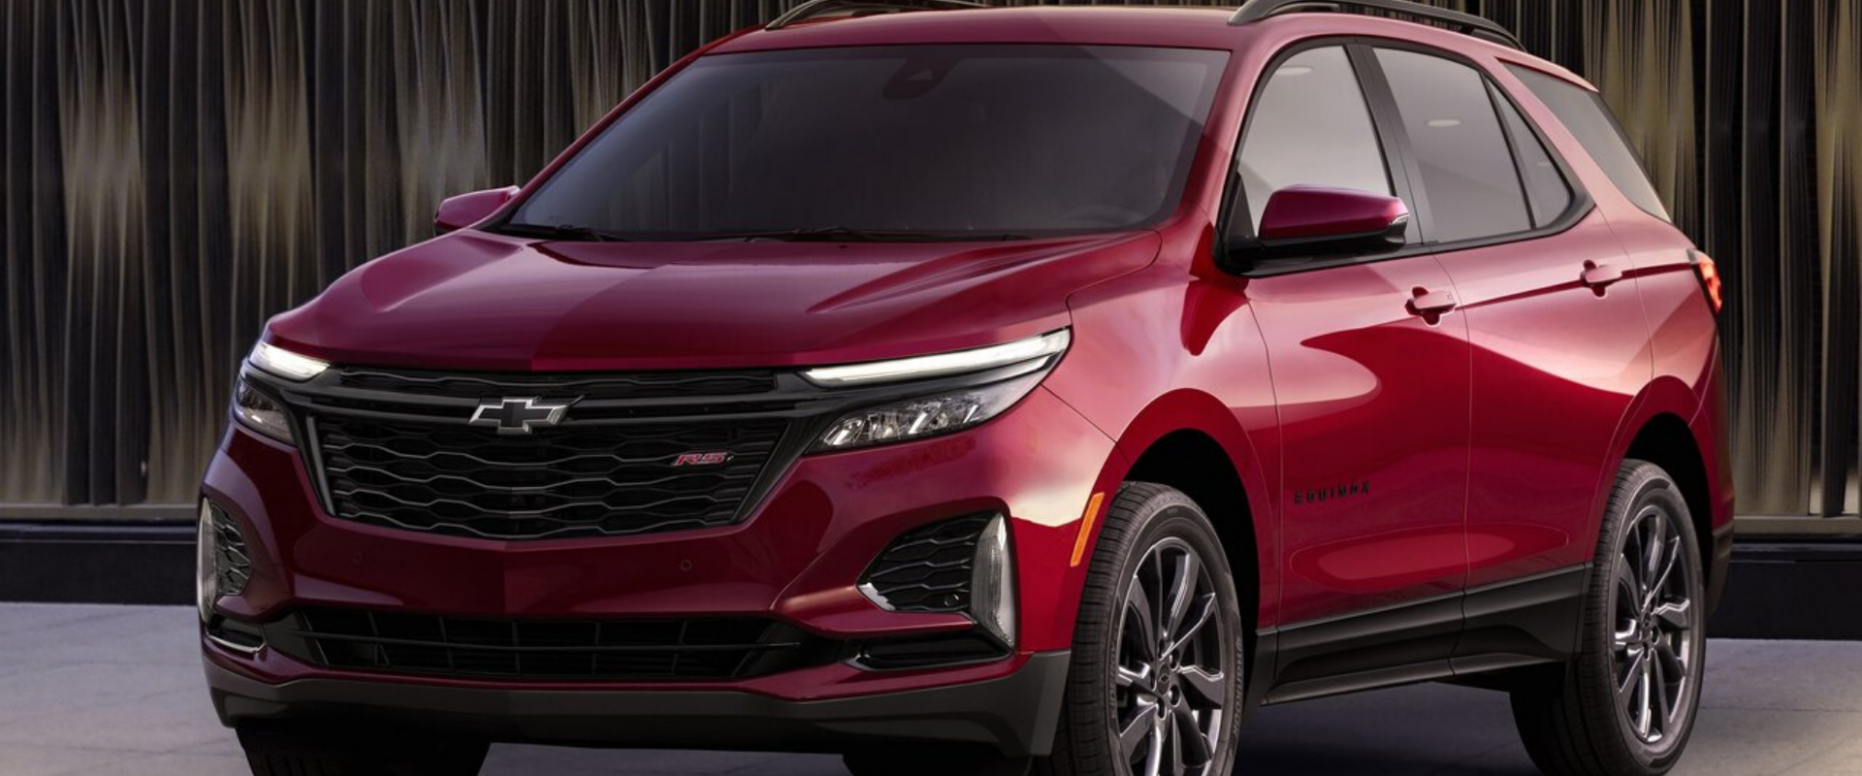 Redesign And Concept 2022 All Chevy Equinox